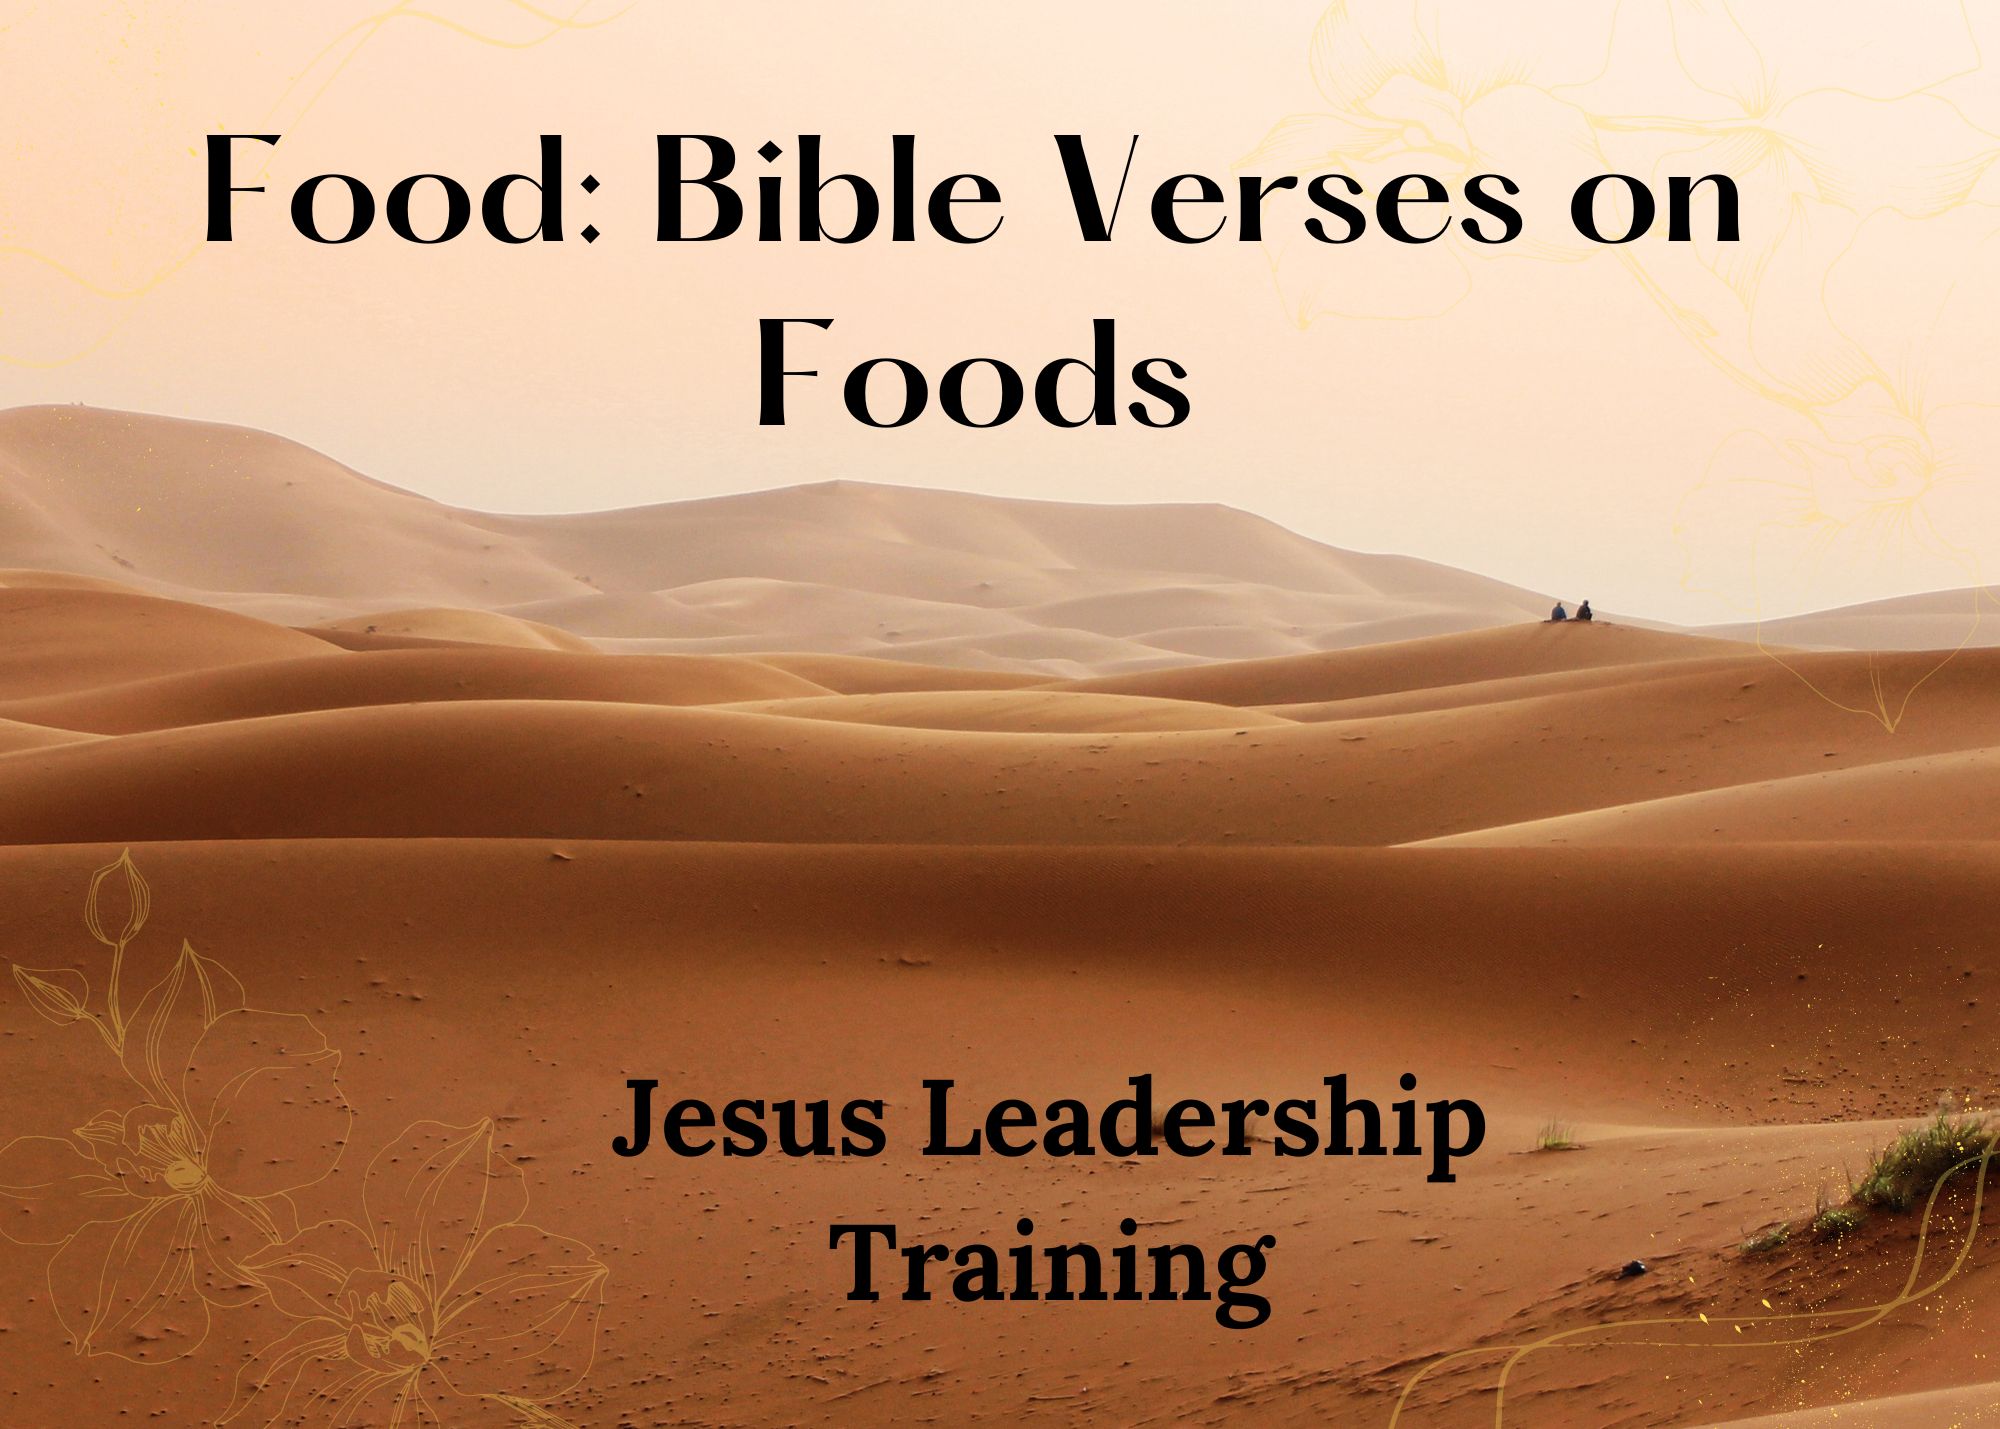 Jesus Leadership Training Announces that they are Adding a Flickify Topical Bible Verse Page to each of Their Lessons